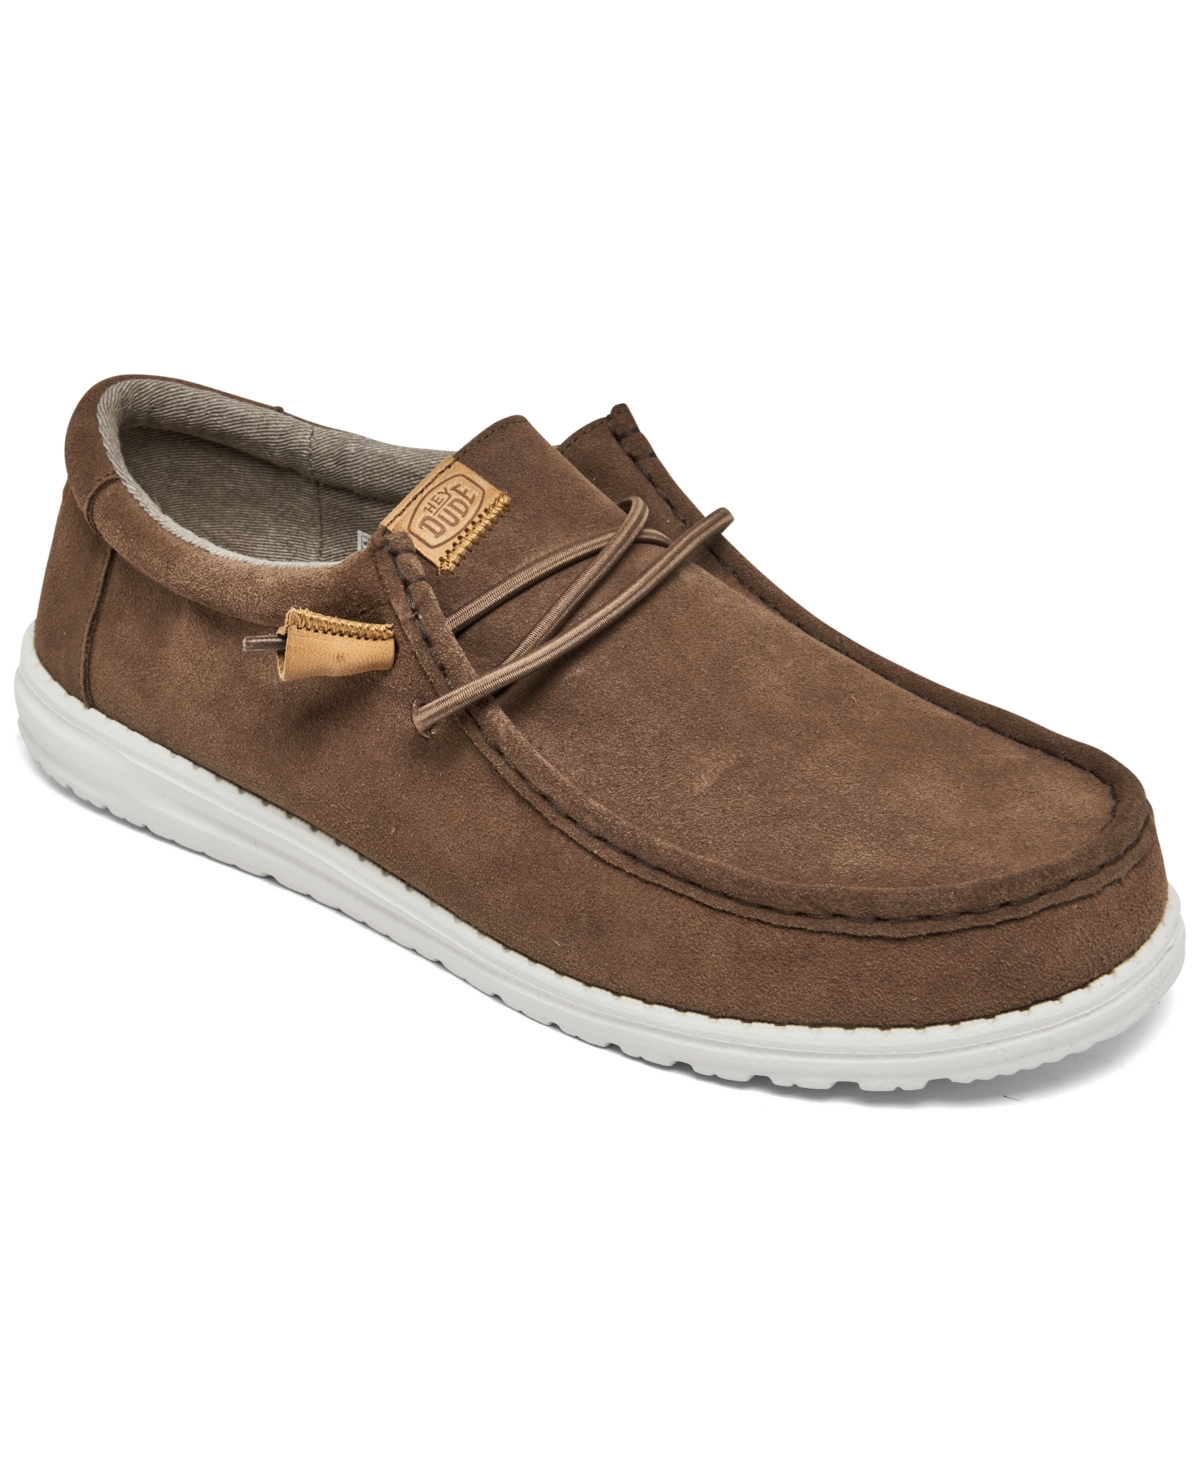 Men's Wally Sox Craft Suede Casual Moccasin Sneakers from Finish Line - Brown